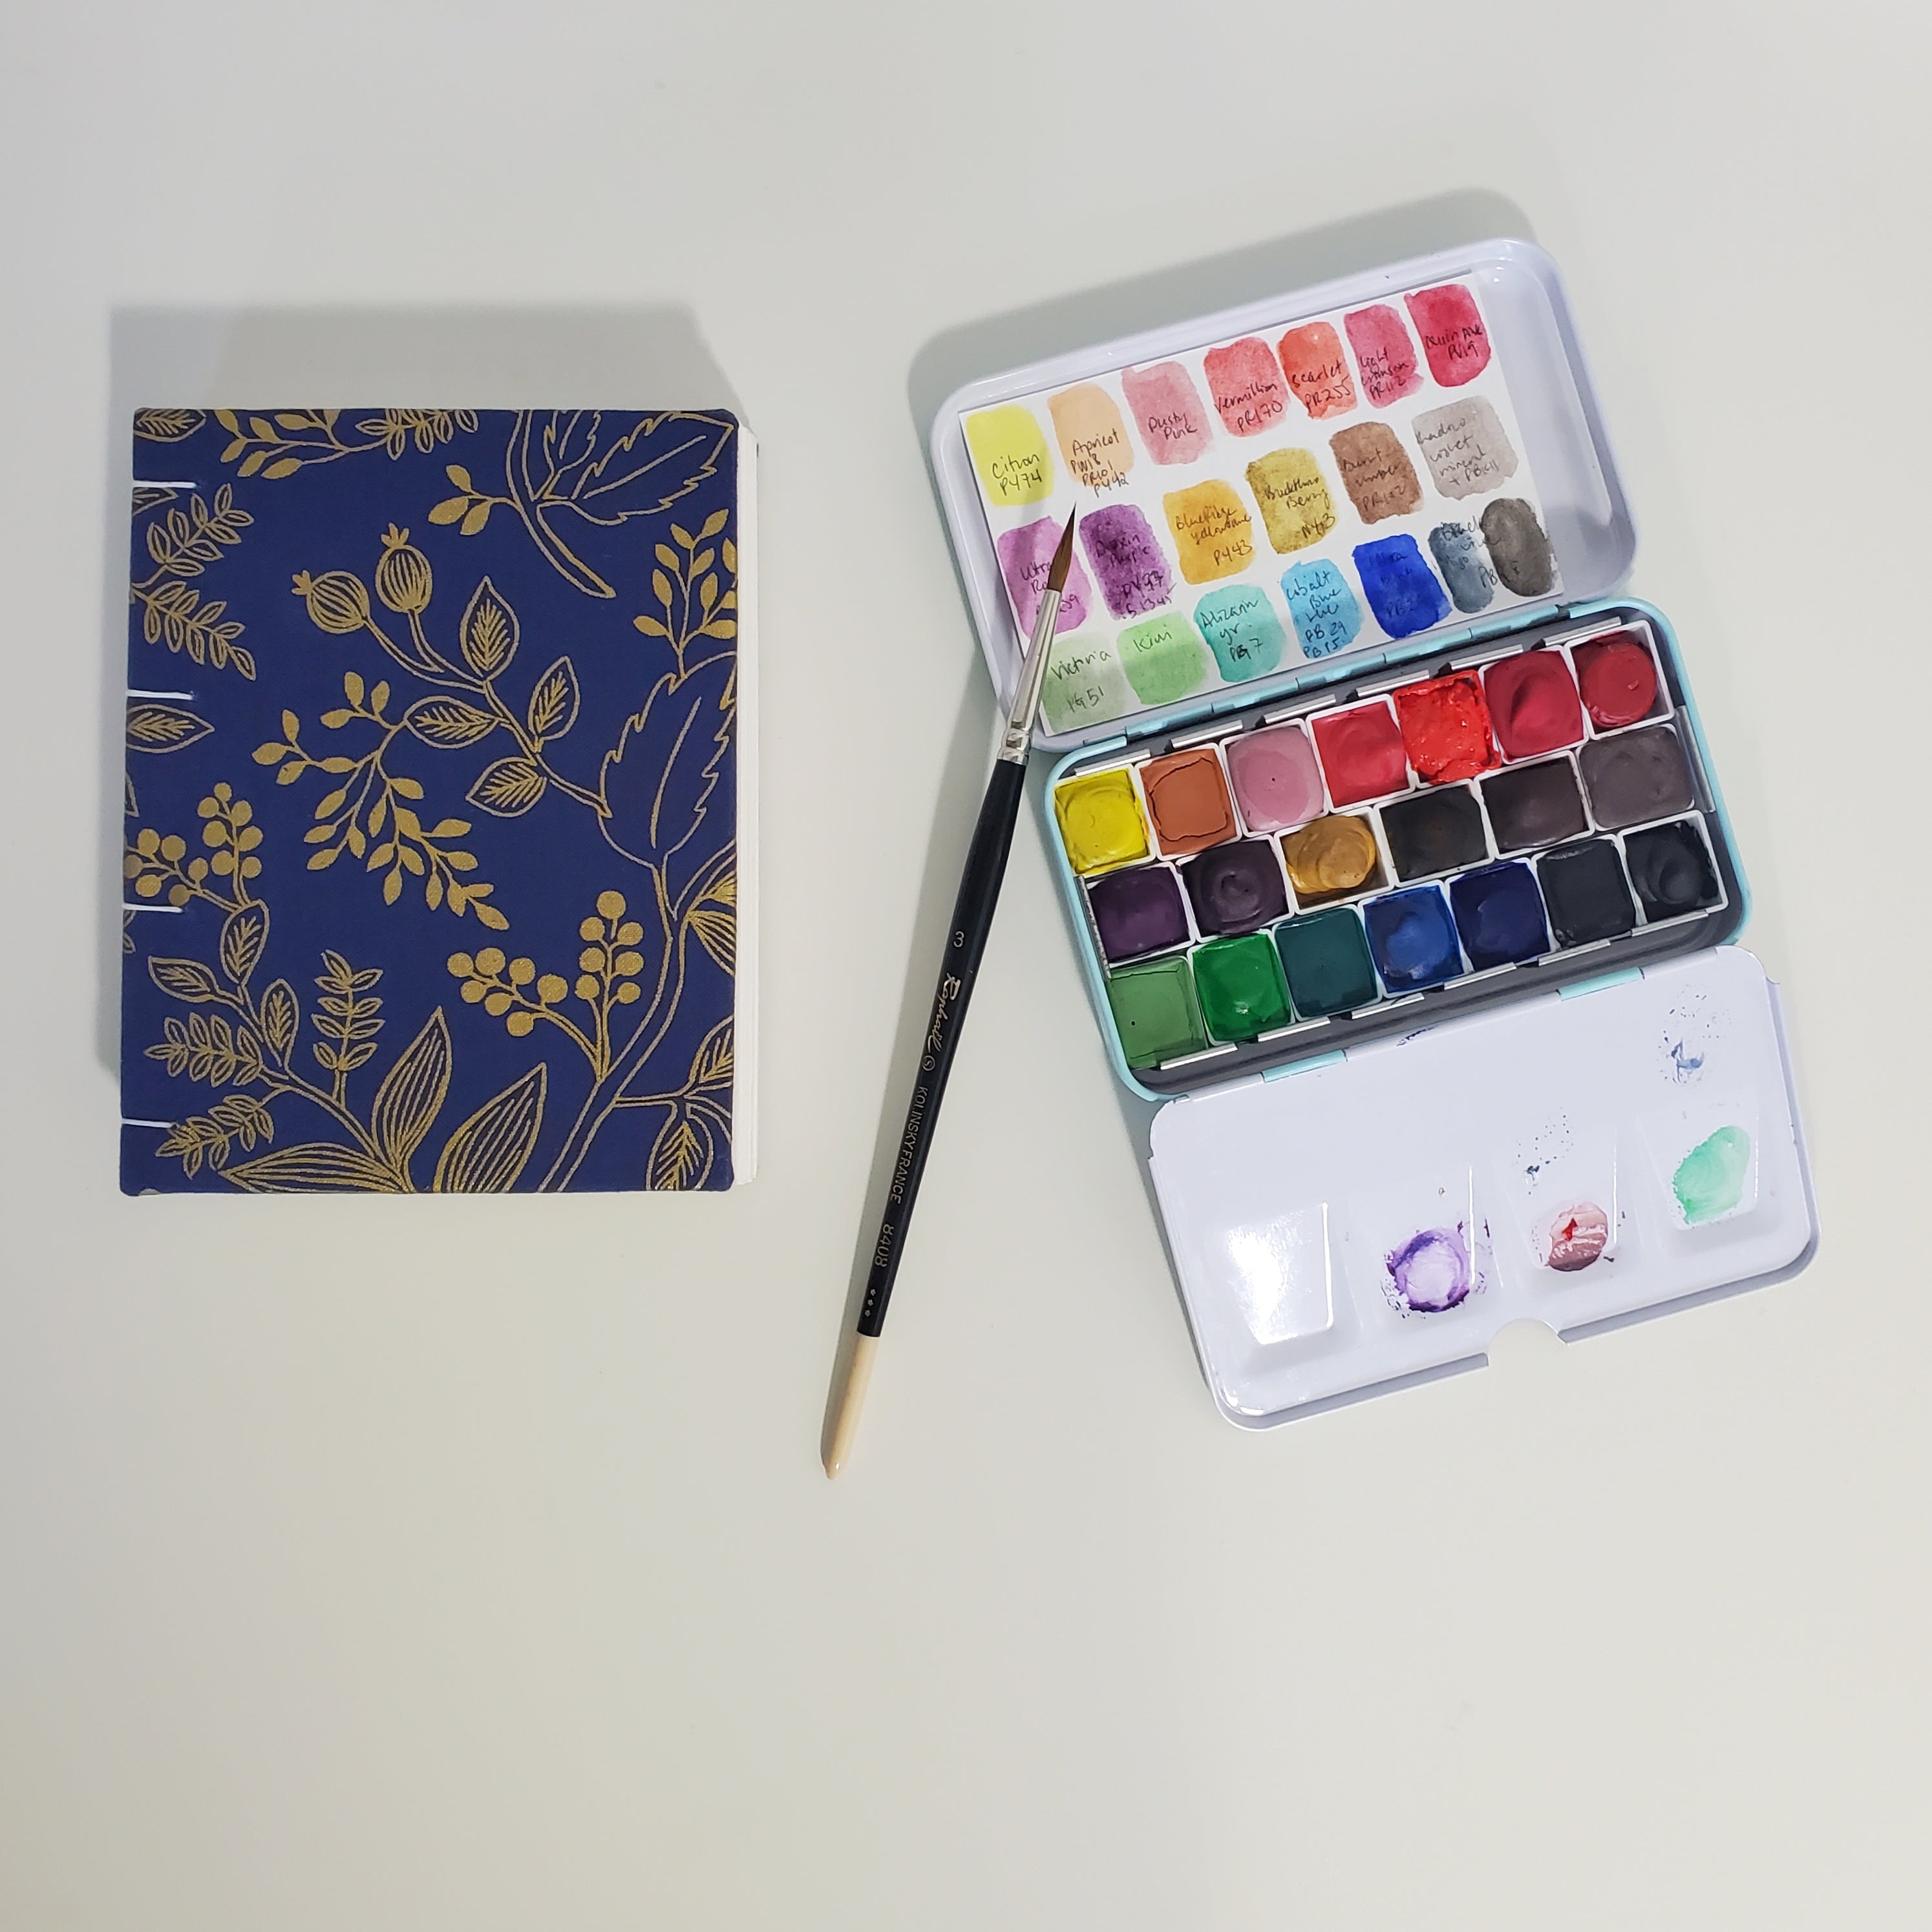 Handmade Mini Watercolor Sketchbook | Queen Anne in Navy - LIMITED EDITION